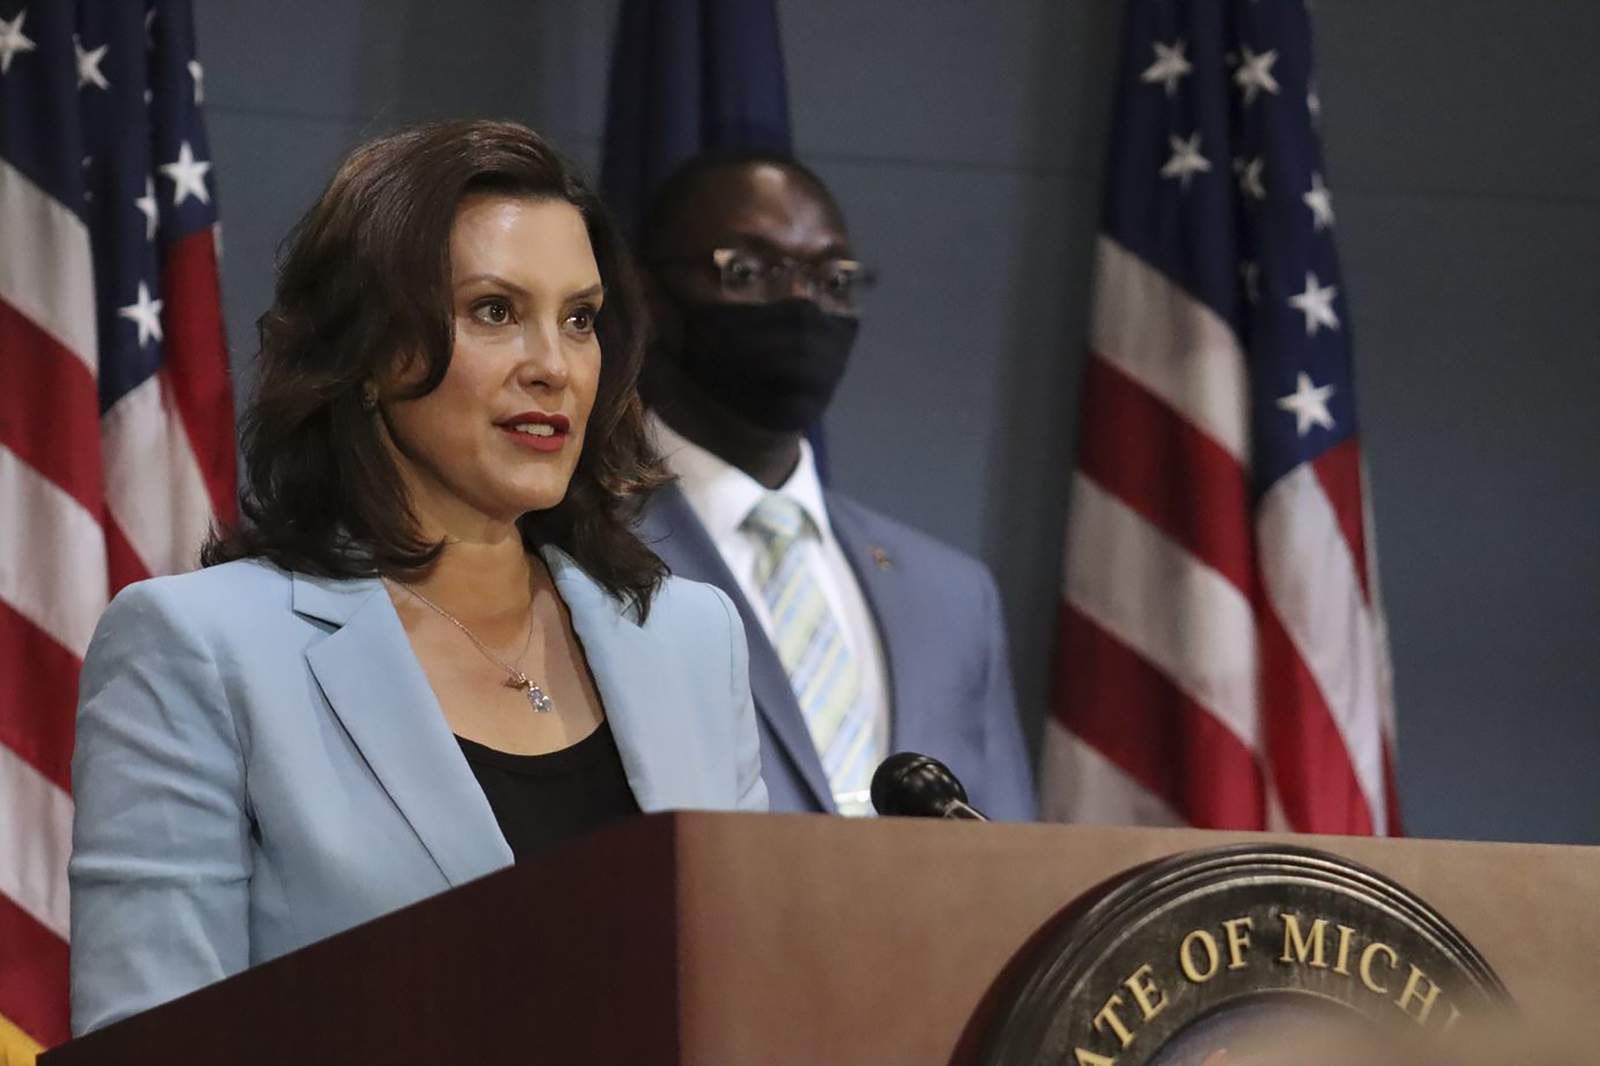 Michigan Gov. Whitmer extends order allowing remote education, supervision for pharmacists